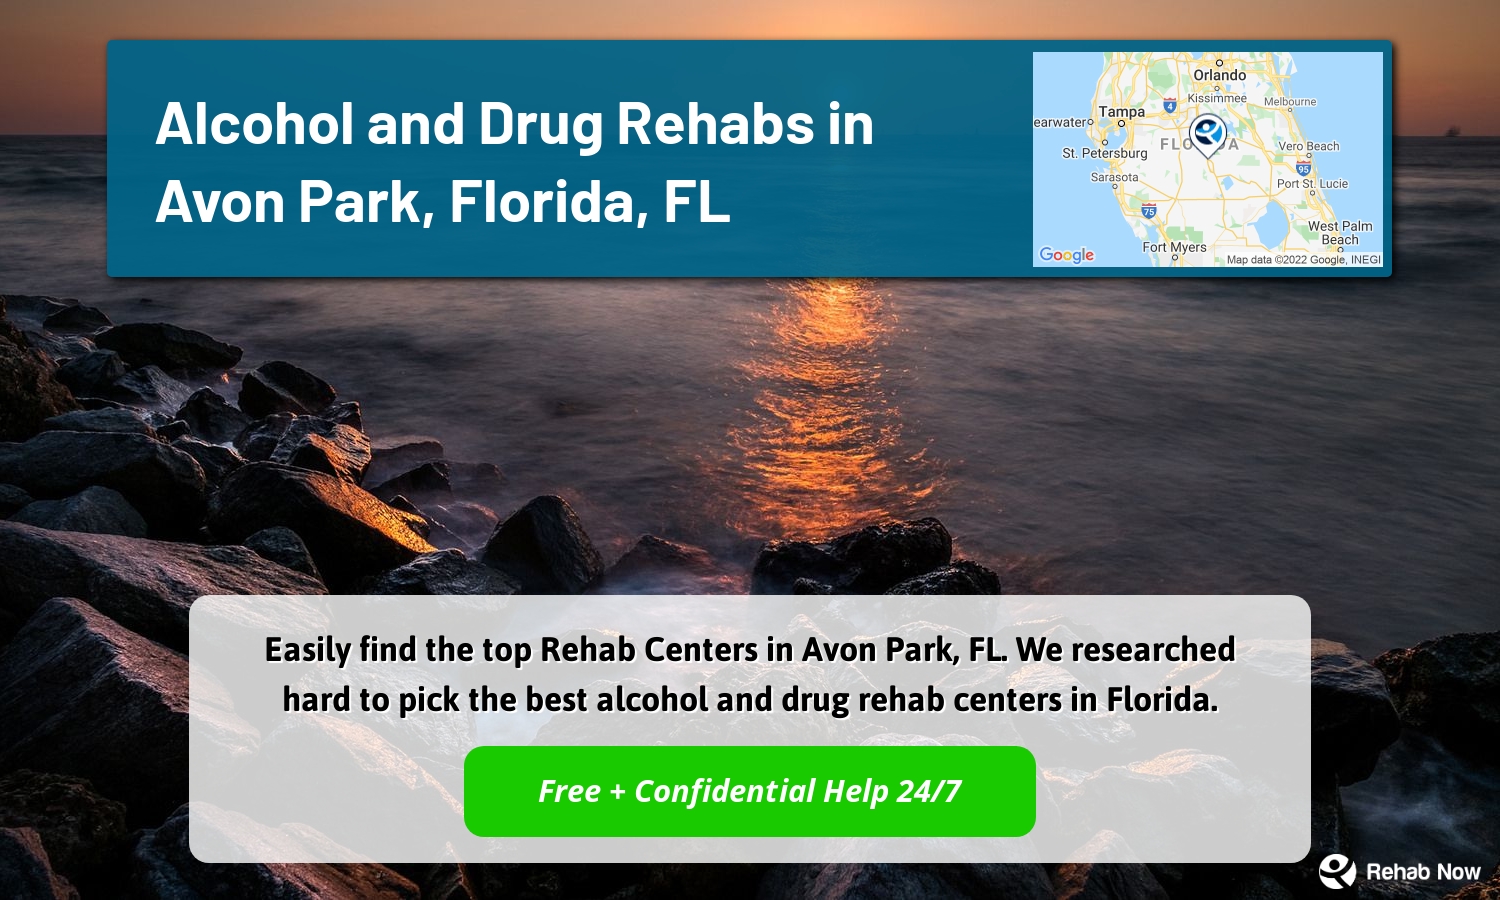 Easily find the top Rehab Centers in Avon Park, FL. We researched hard to pick the best alcohol and drug rehab centers in Florida.